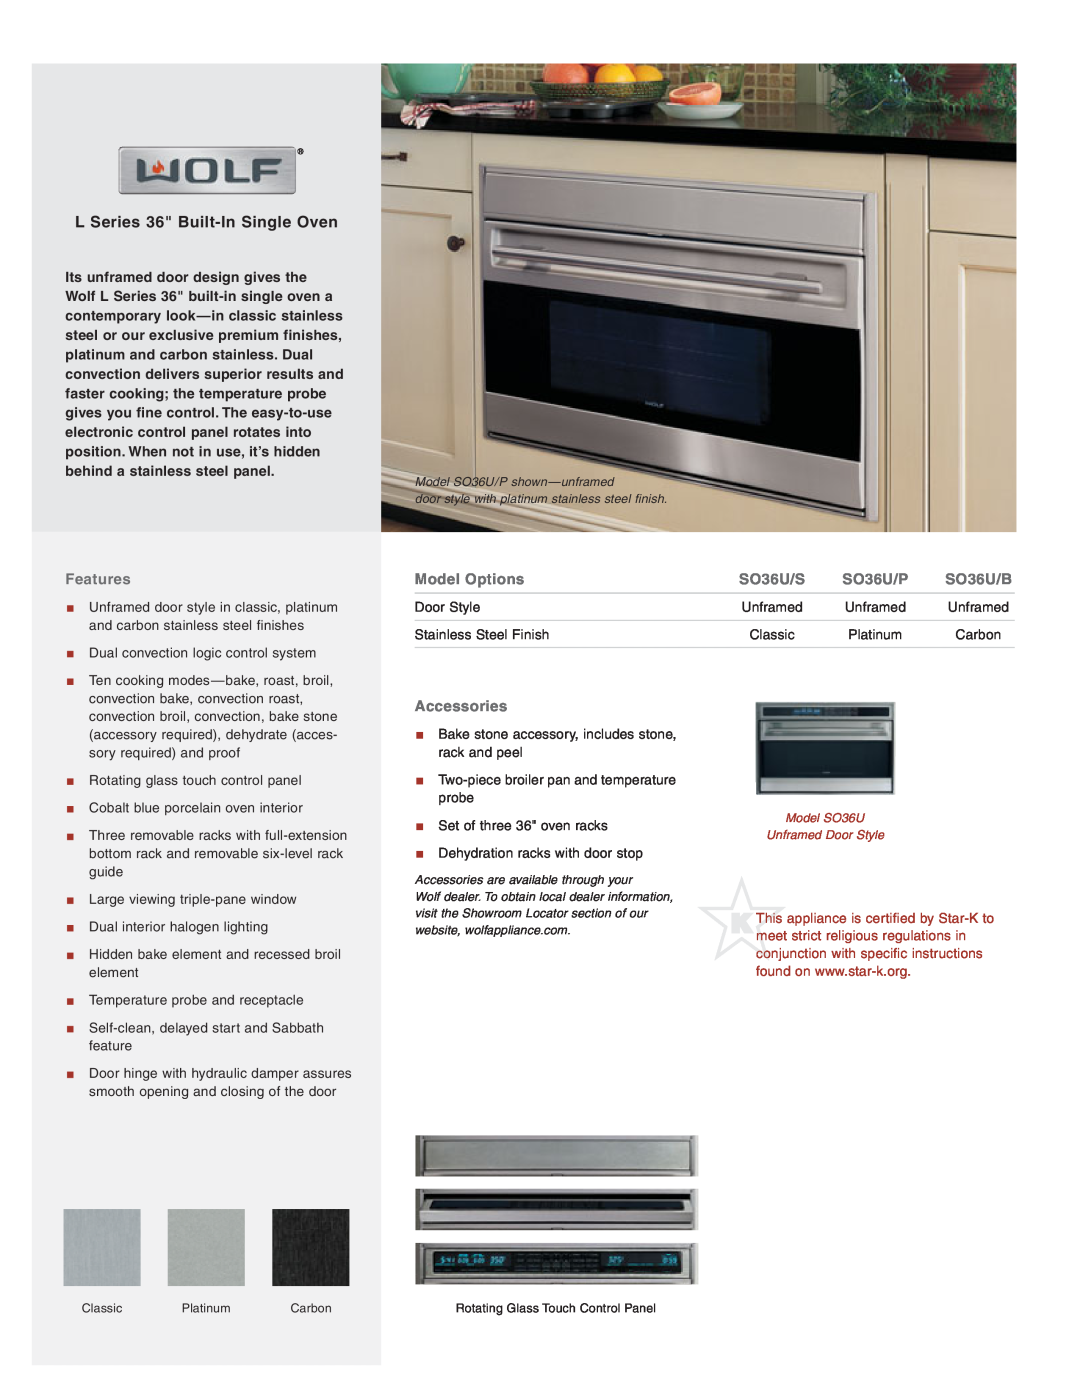 Wolf Appliance Company manual L Series 36 Built-In Single Oven, Features, Model Options, SO36U/S, SO36U/P, SO36U/B 